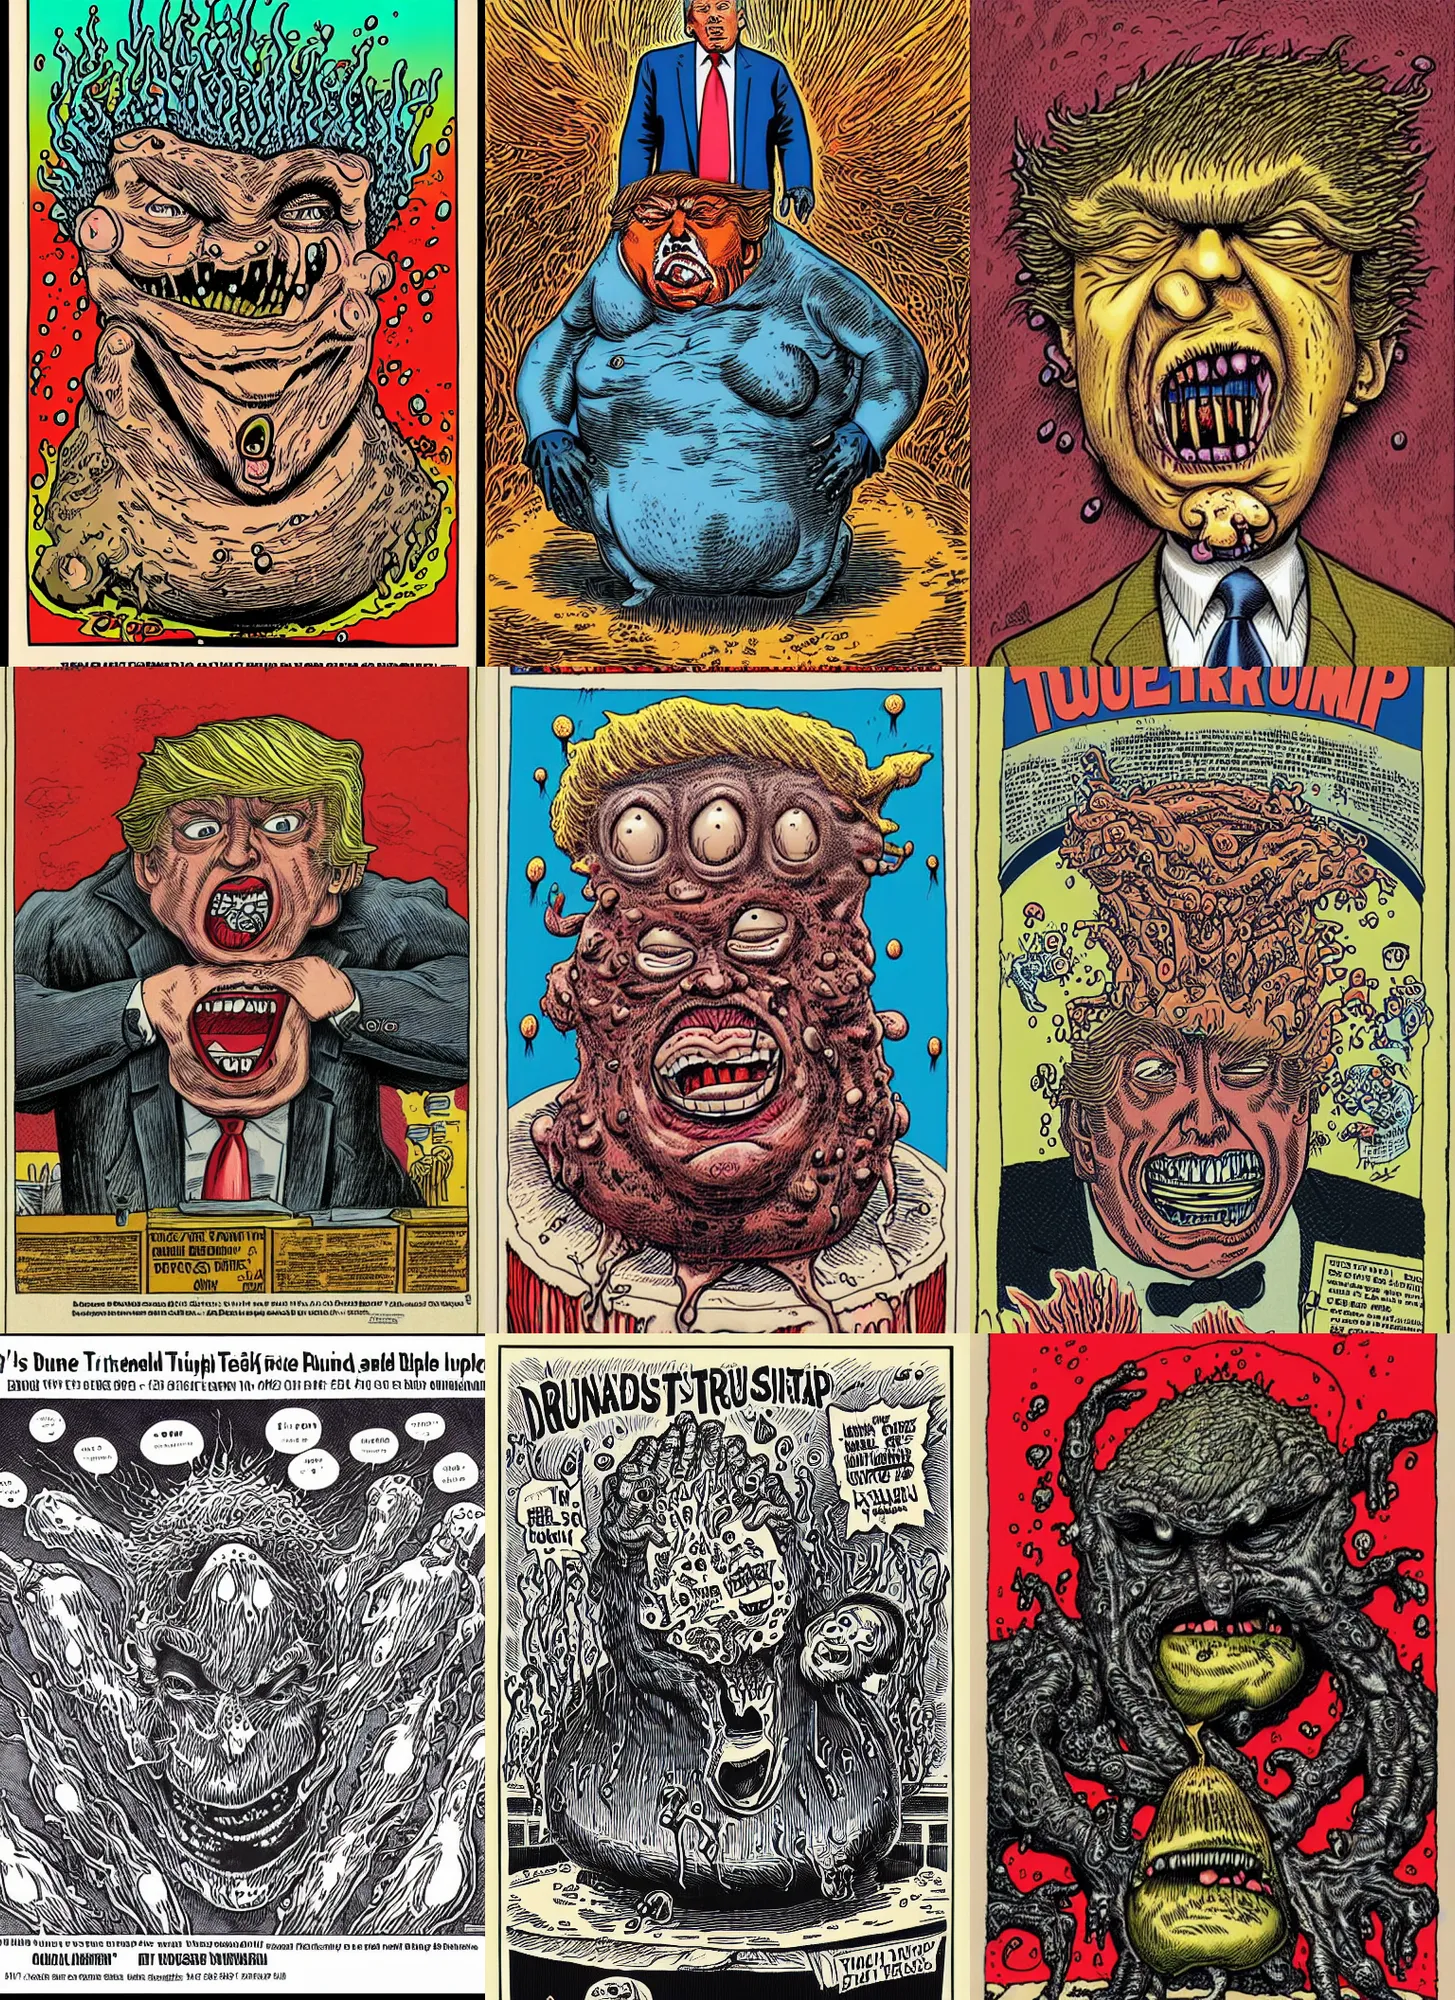 Prompt: donald trump's repulsive true form bursting from within, pus - filled boils, cysts, oozing pustules, by robert crumb